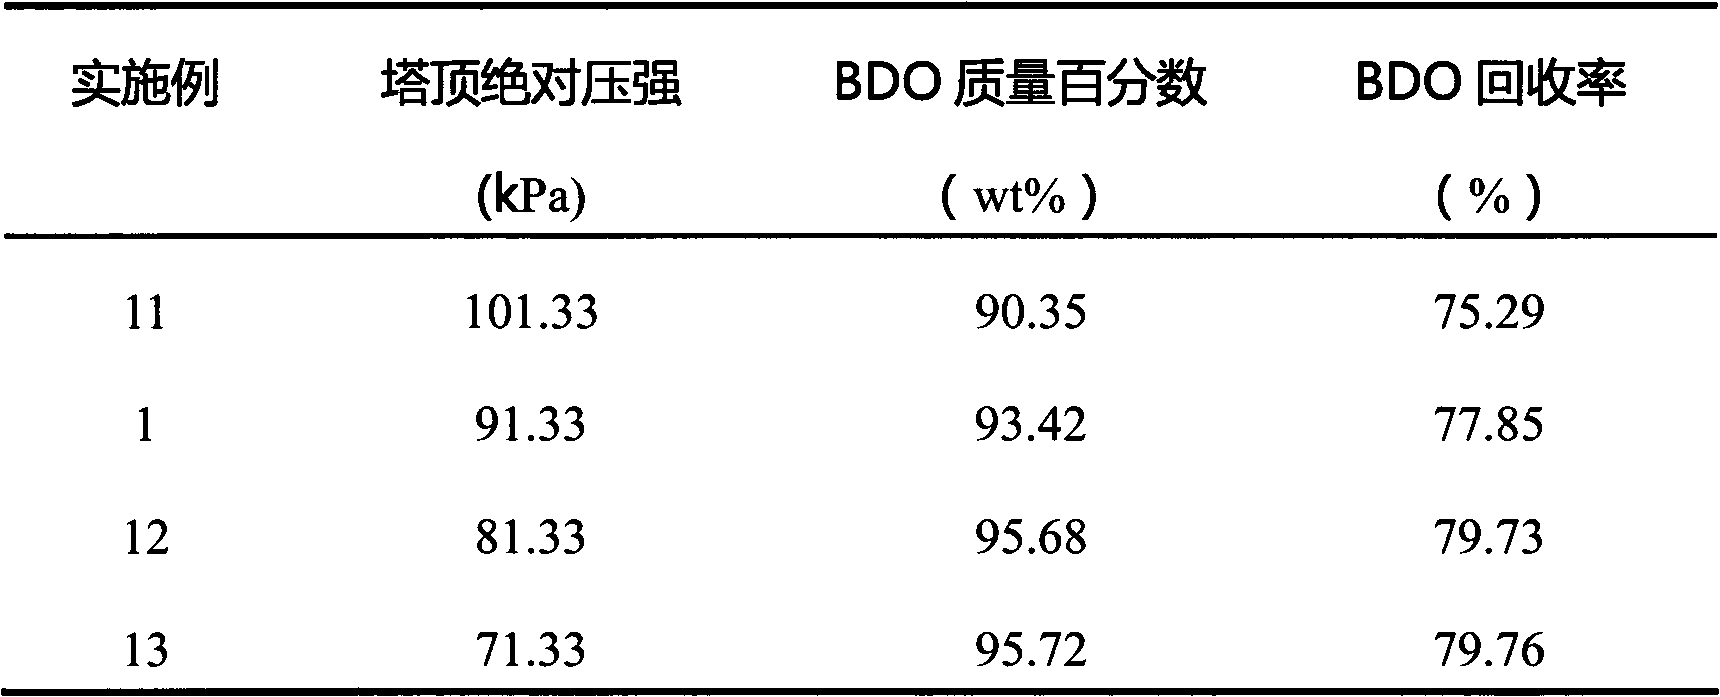 Method for recovering 1,4-butanediol from waste liquor generated in production of 1,4-butanediol through Reppe method